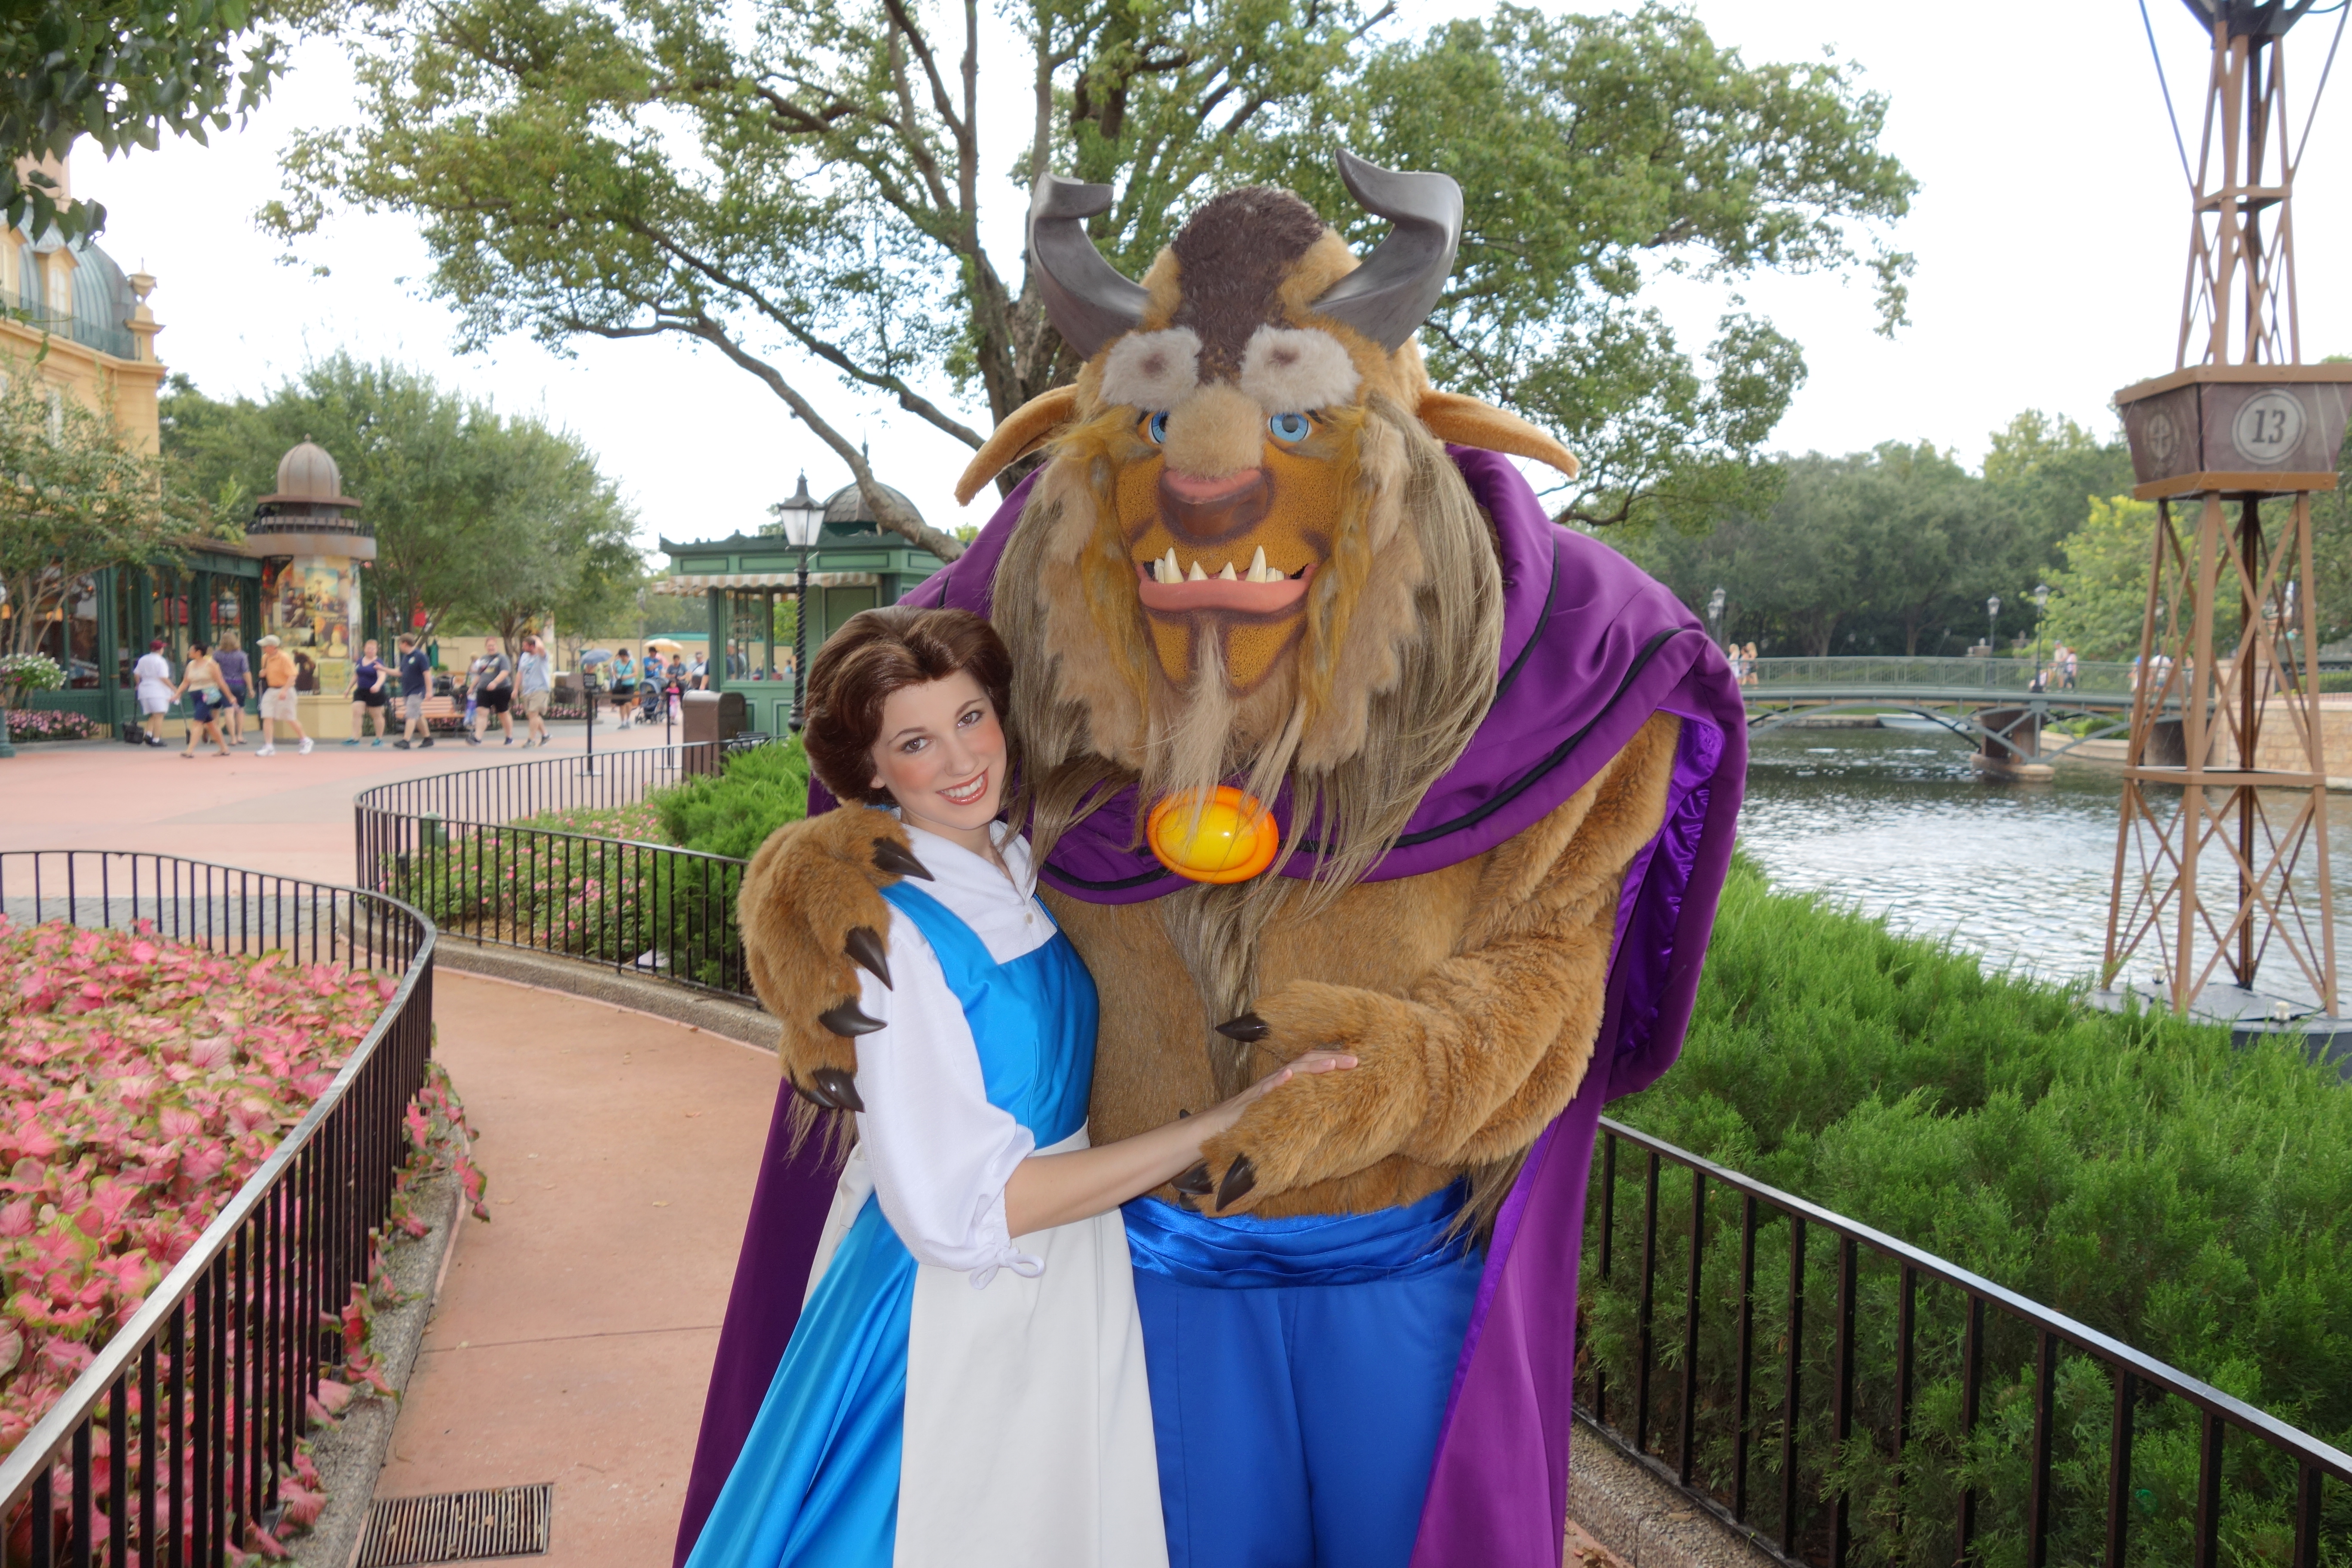 Beast with Belle in France September 2012.  Rumor has it that he will be leaving Epcot in favor of dinner photo ops at his new restaurant.